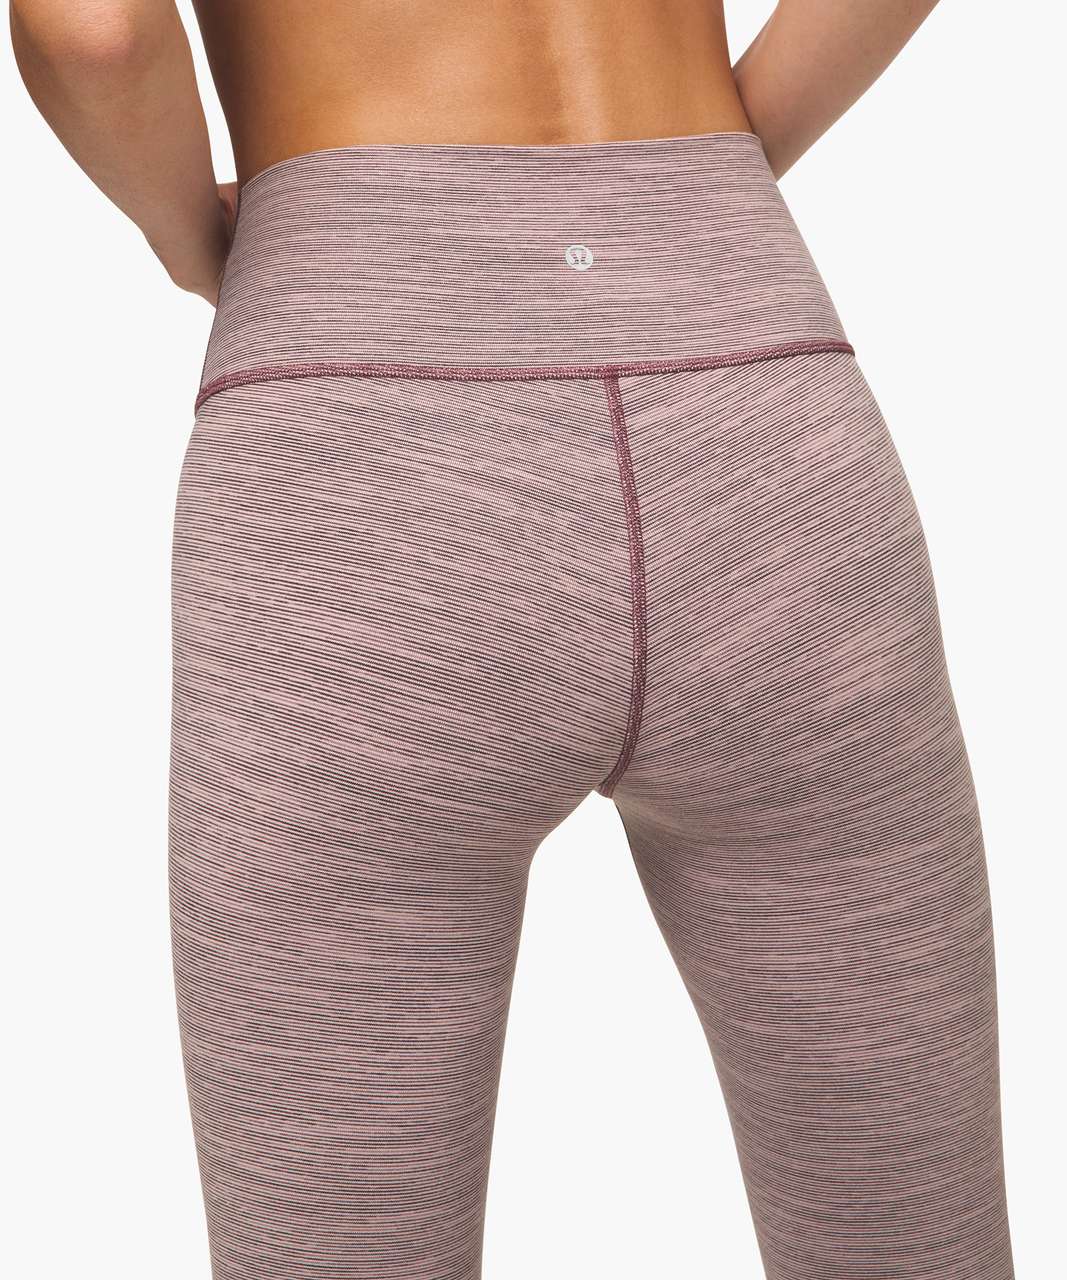 Lululemon Wunder Under High-Rise Tight 25" - Wee Are From Space Frosted Mulberry Black Currant